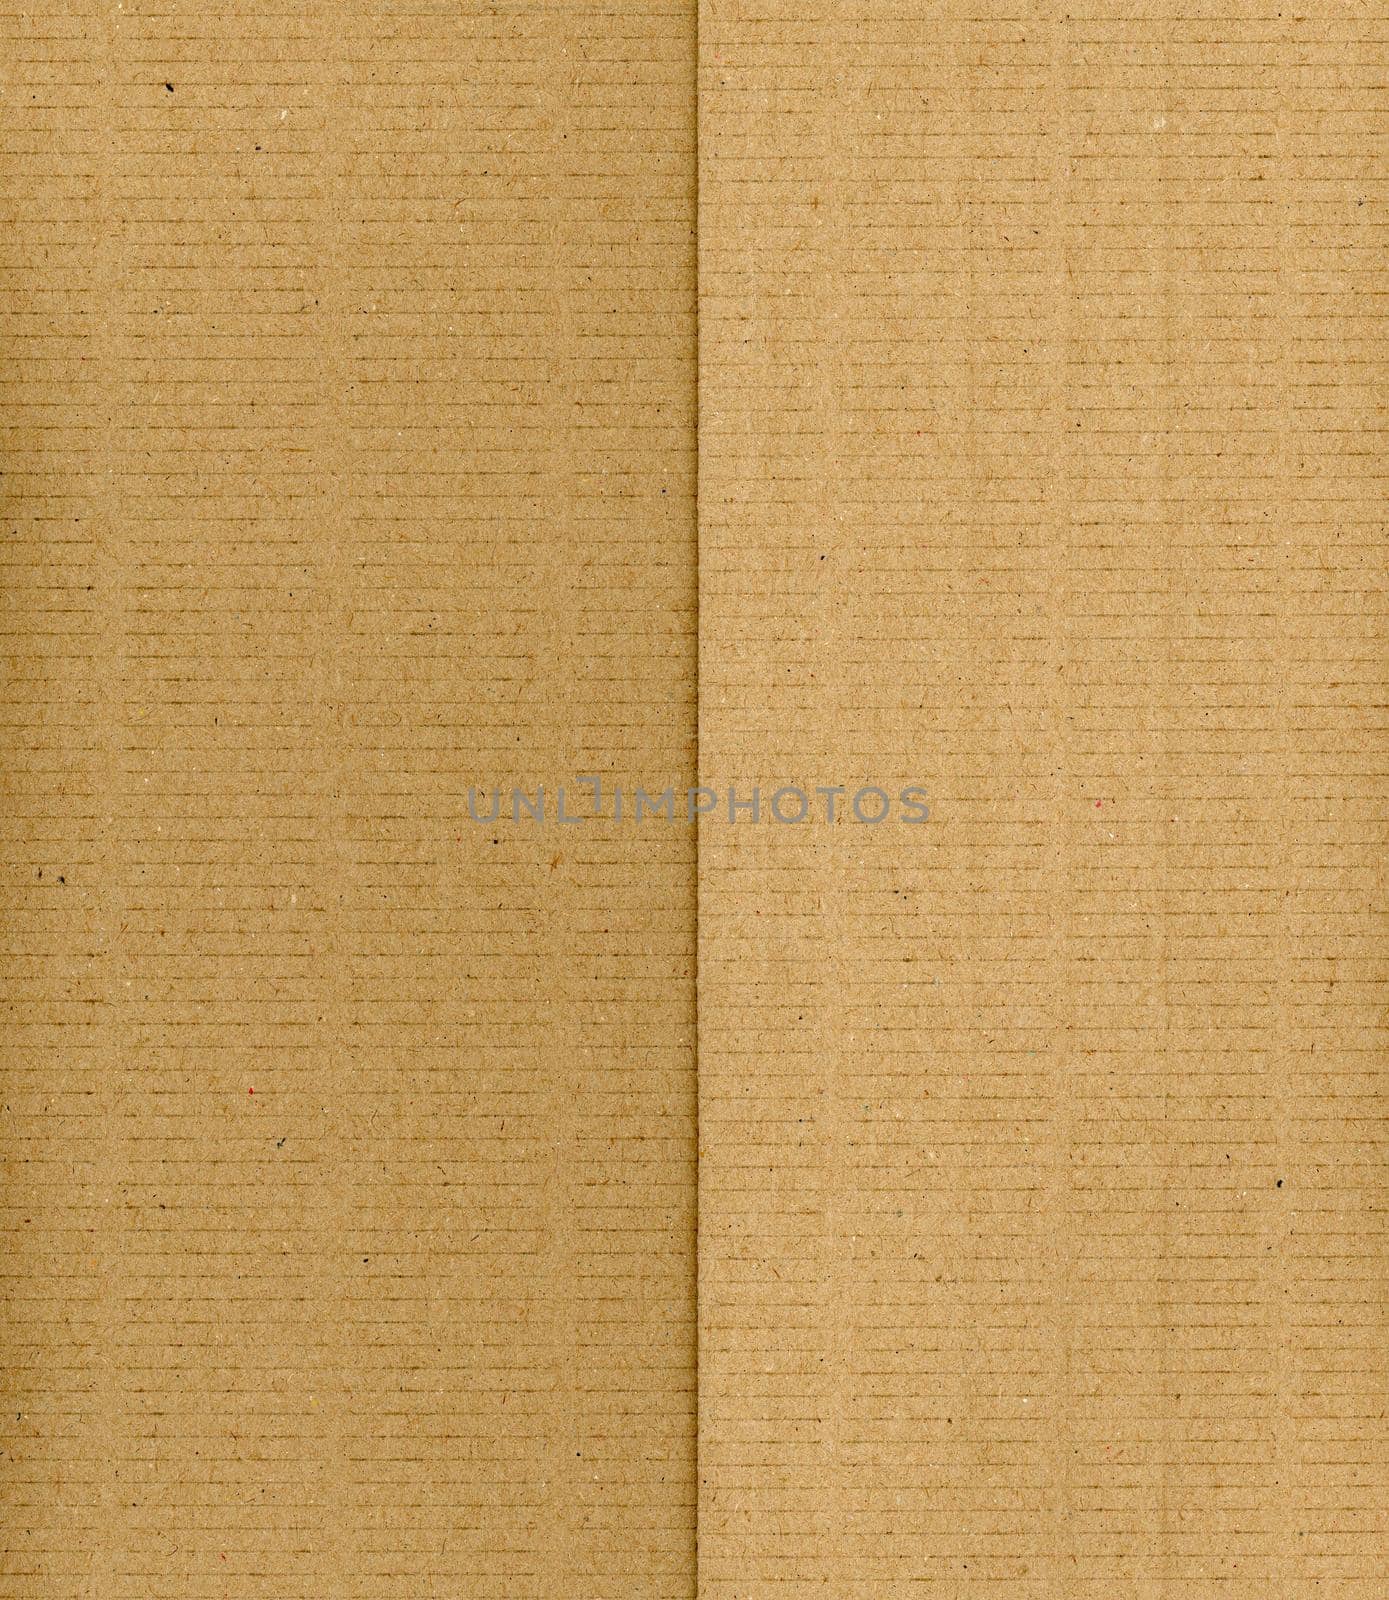 brown corrugated cardboard texture background by claudiodivizia